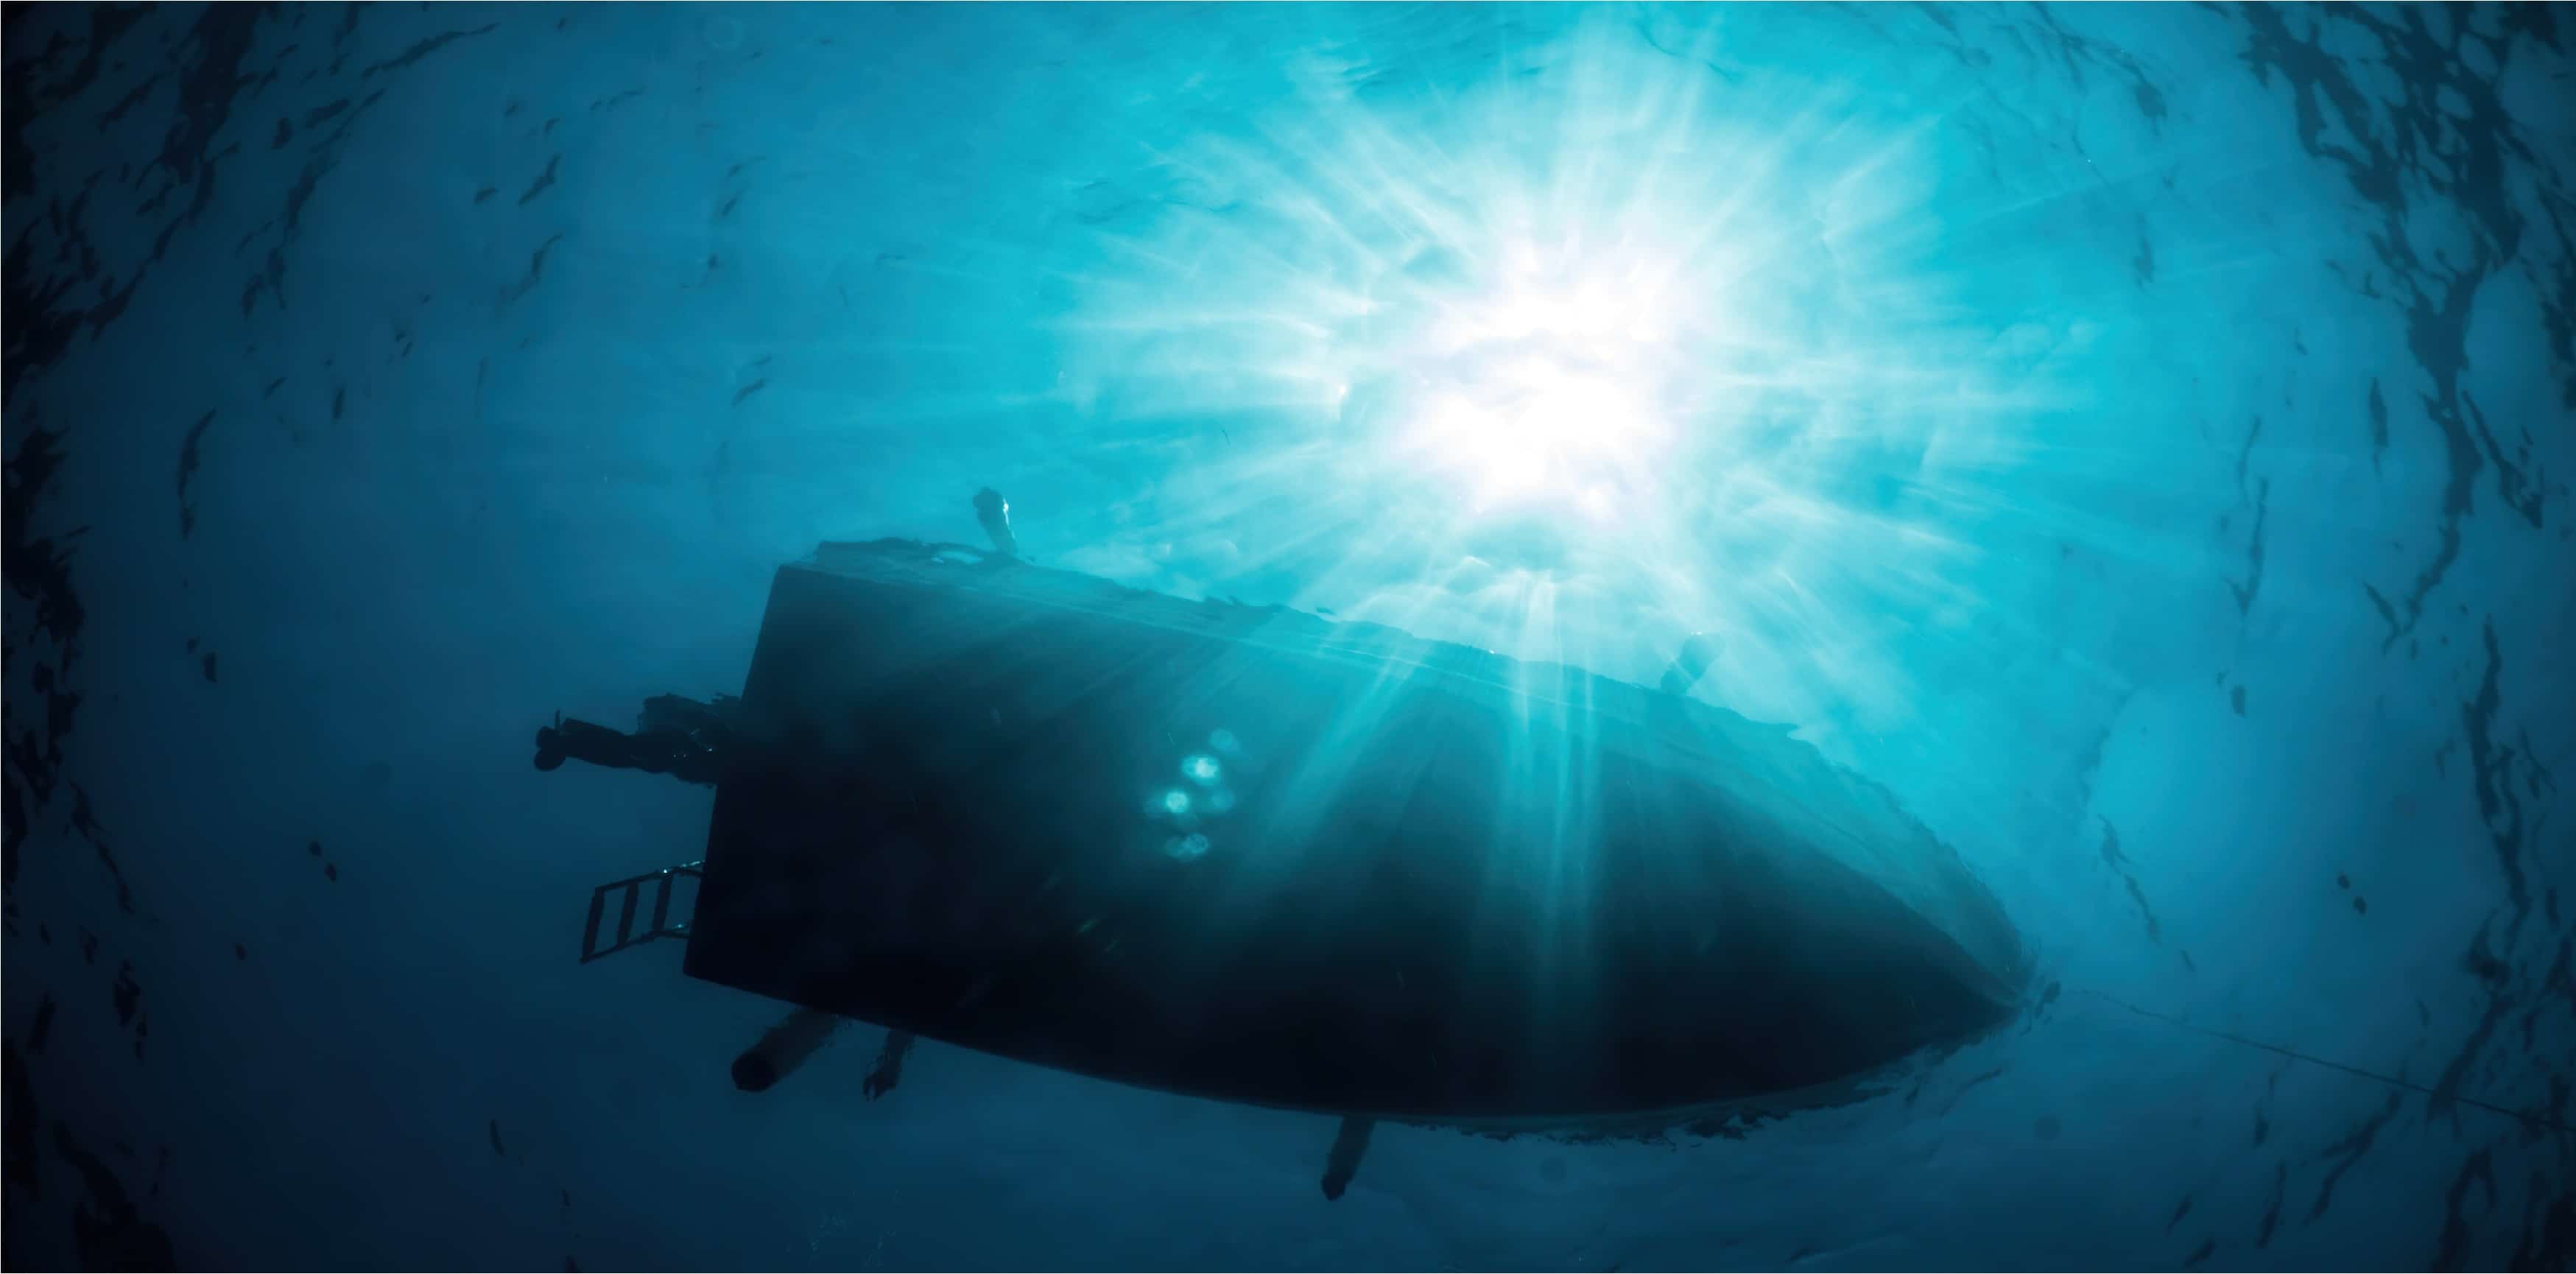 boat floating on the surface of the sea seen from below with high sunlight